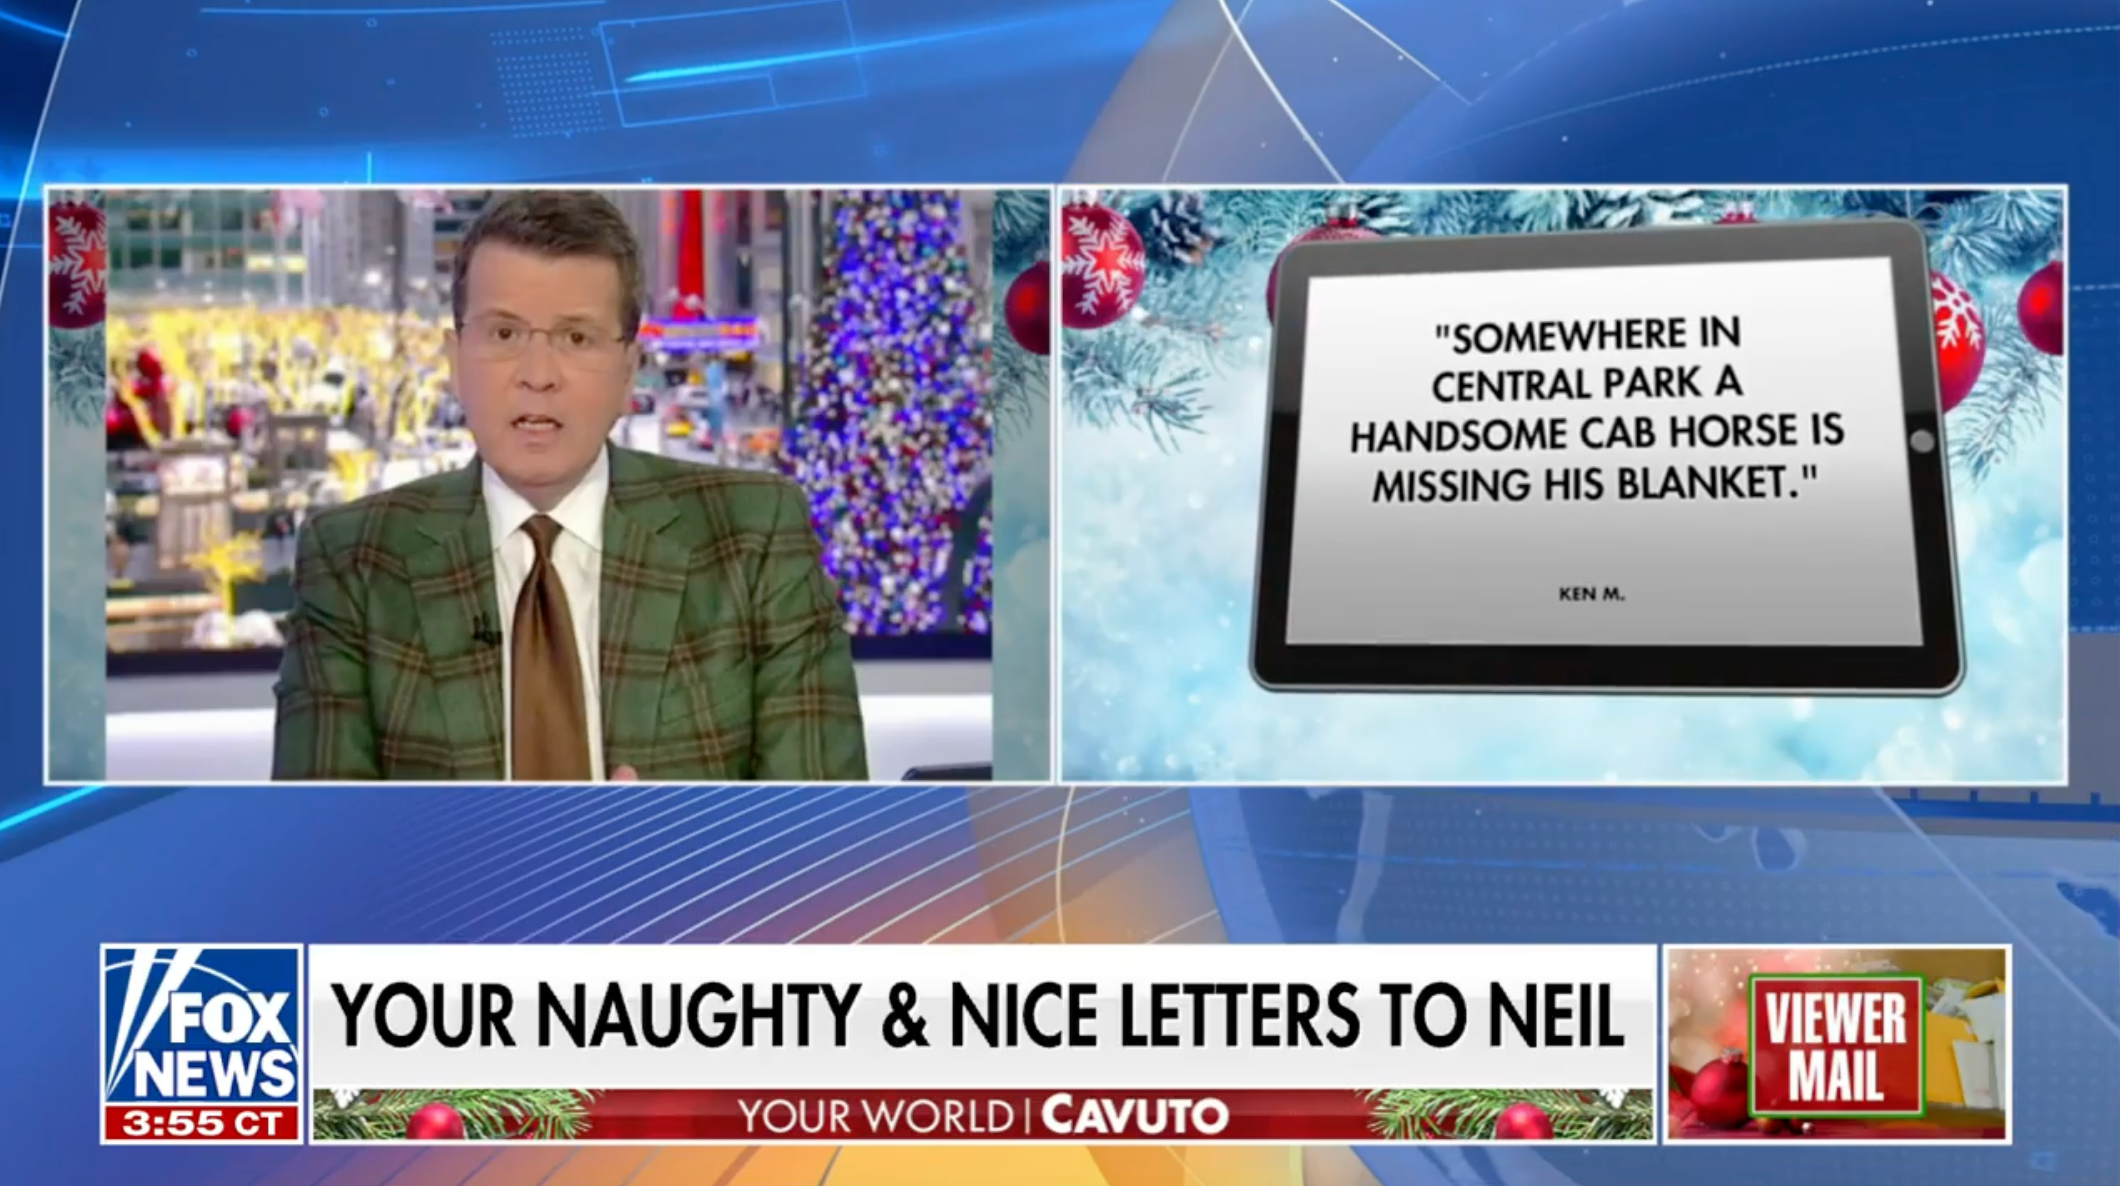 Viewers also sent more light-hearted hate mail, mocking a recent blazer choice by Mr Cavuto.